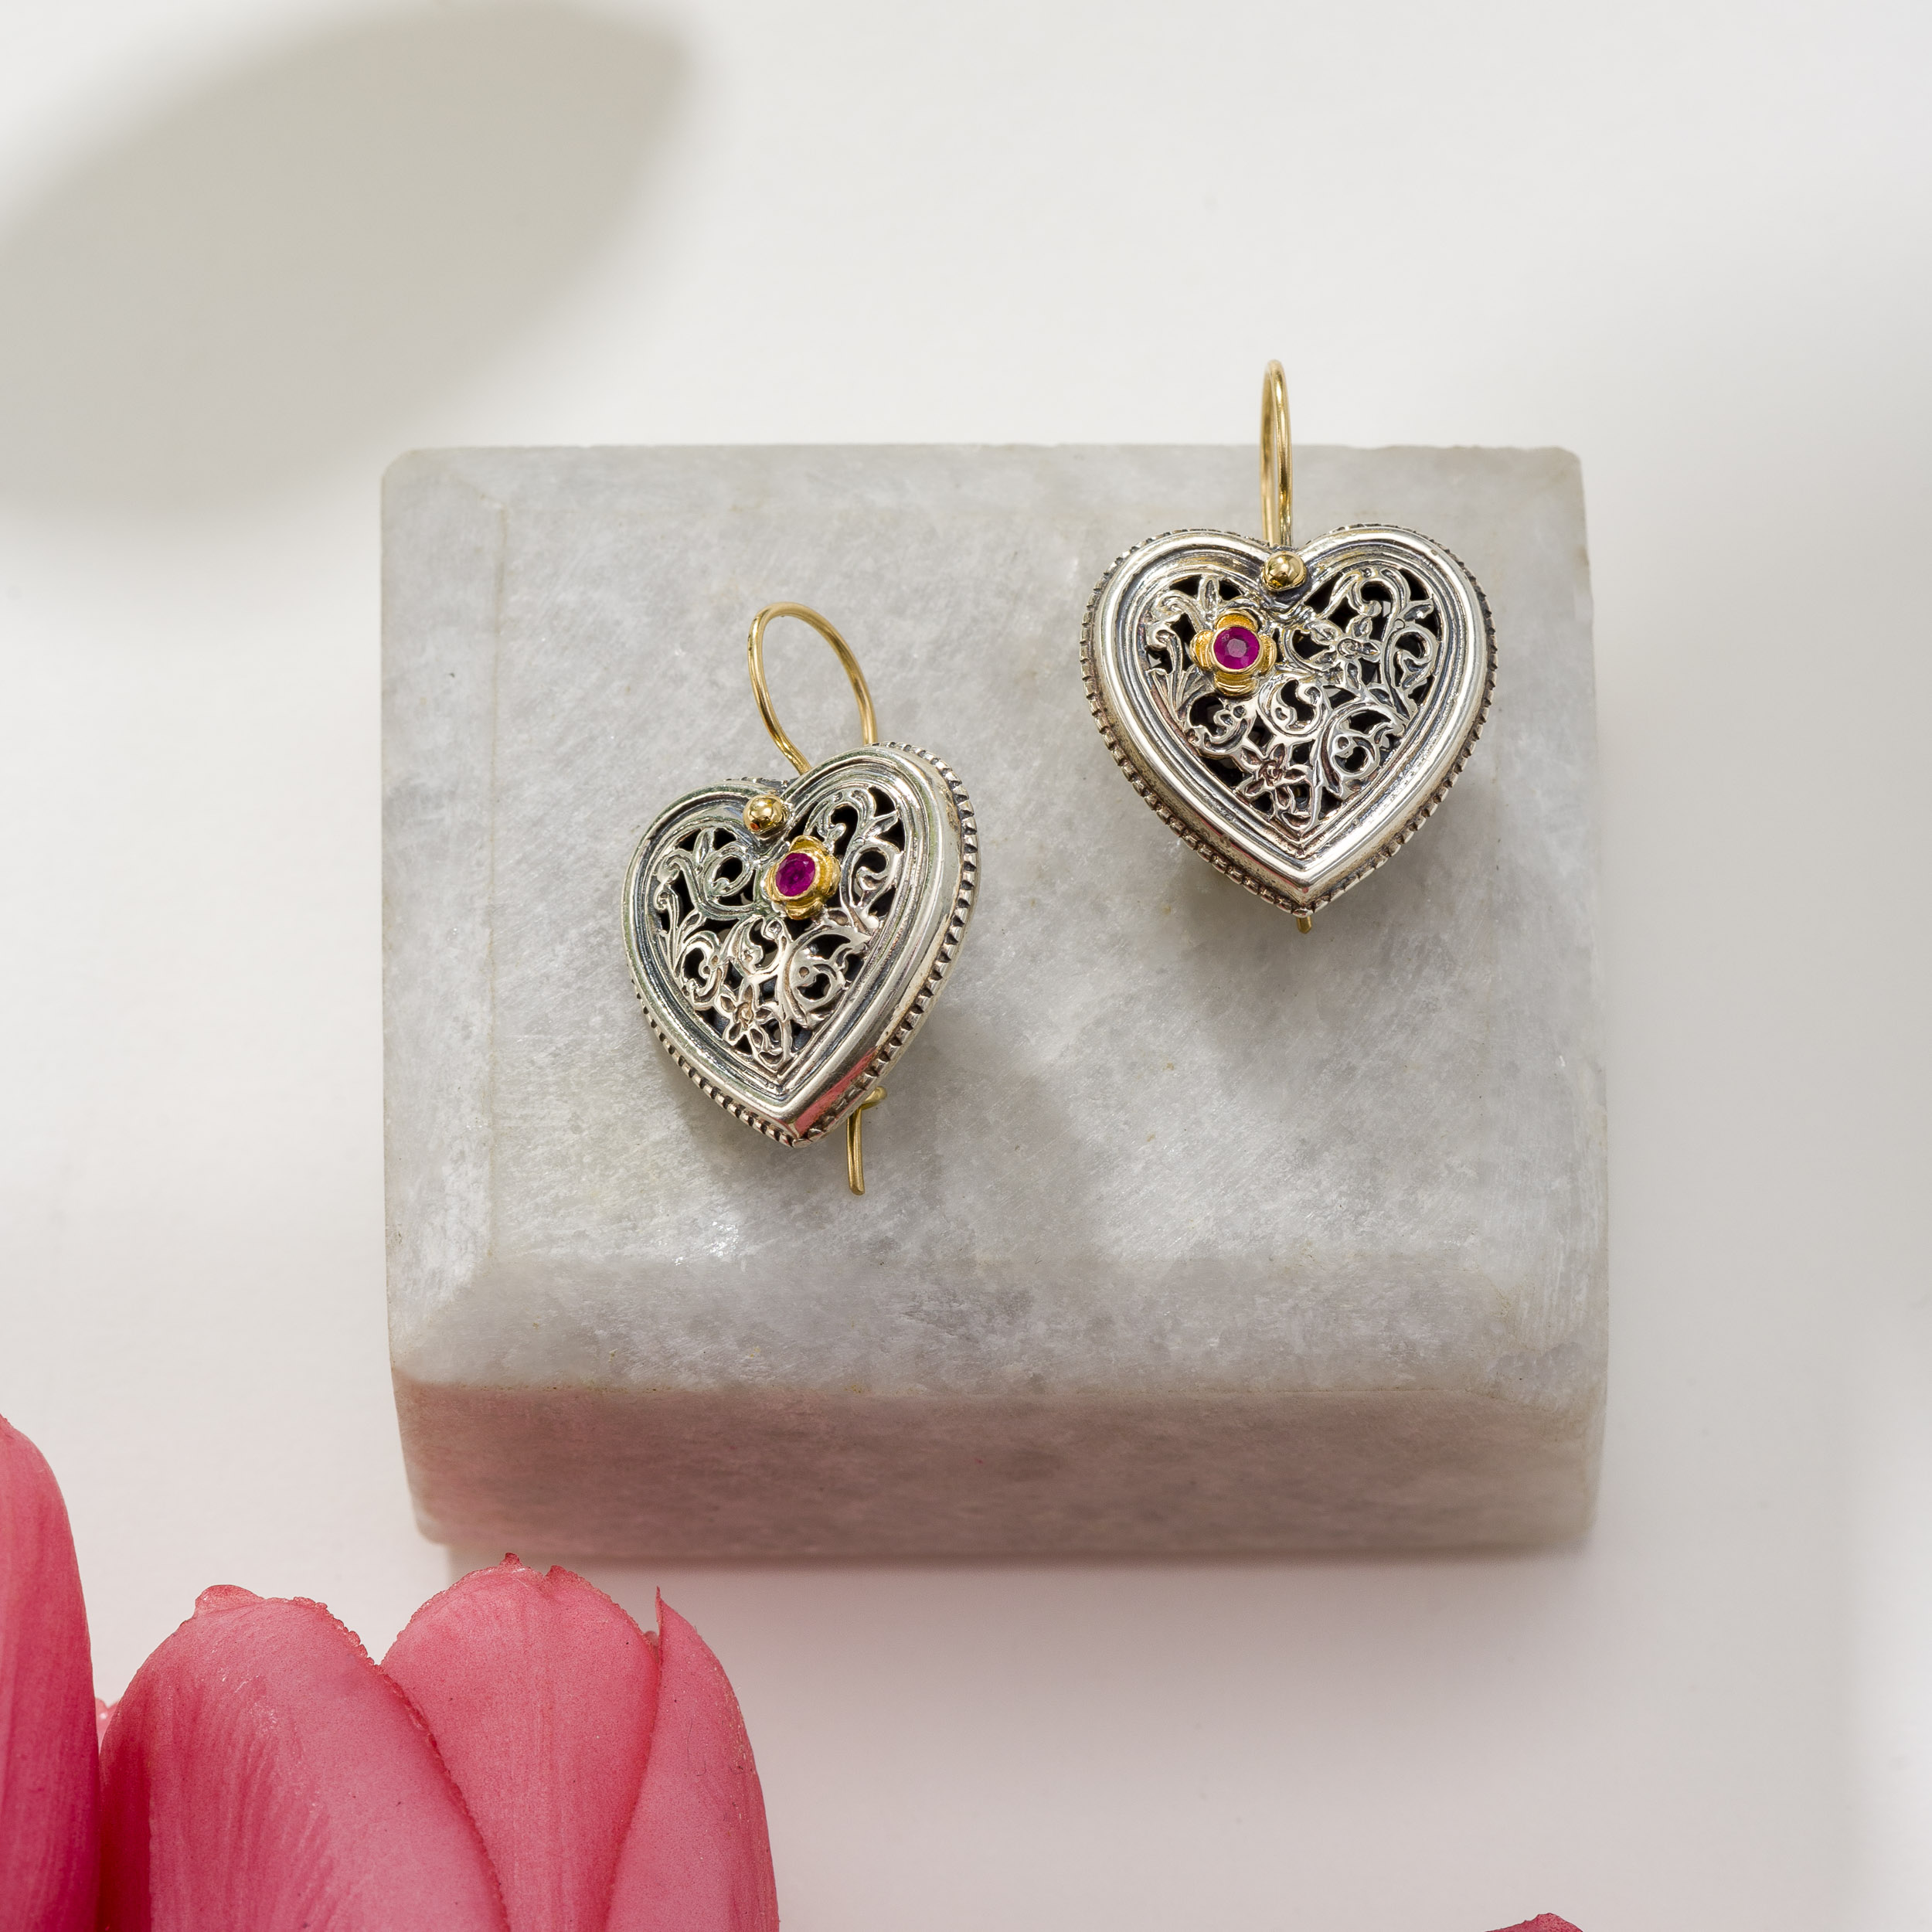 Garden Shadows Heart Earrings in 18K Gold and Sterling Silver with Ruby